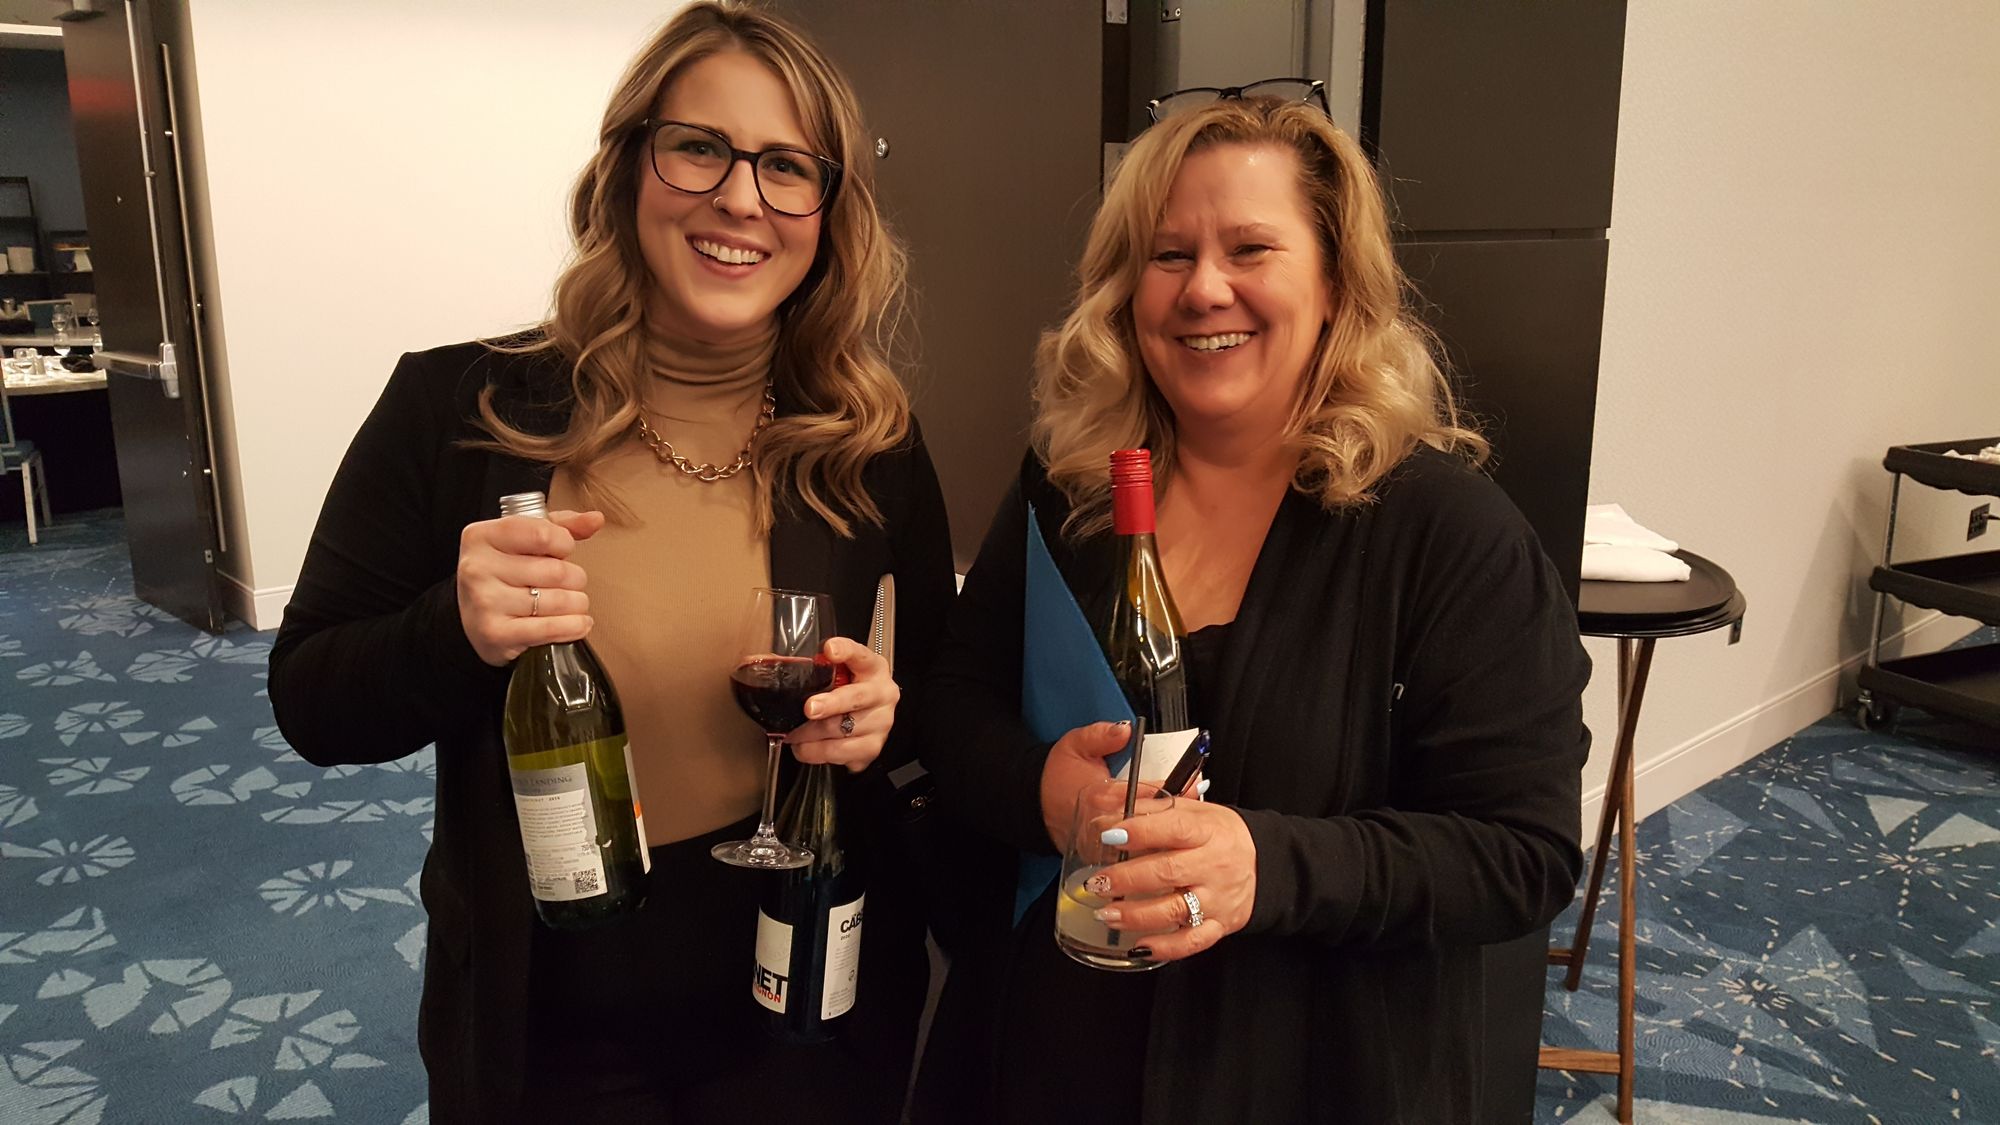 Two female friends smiling and holding wine.